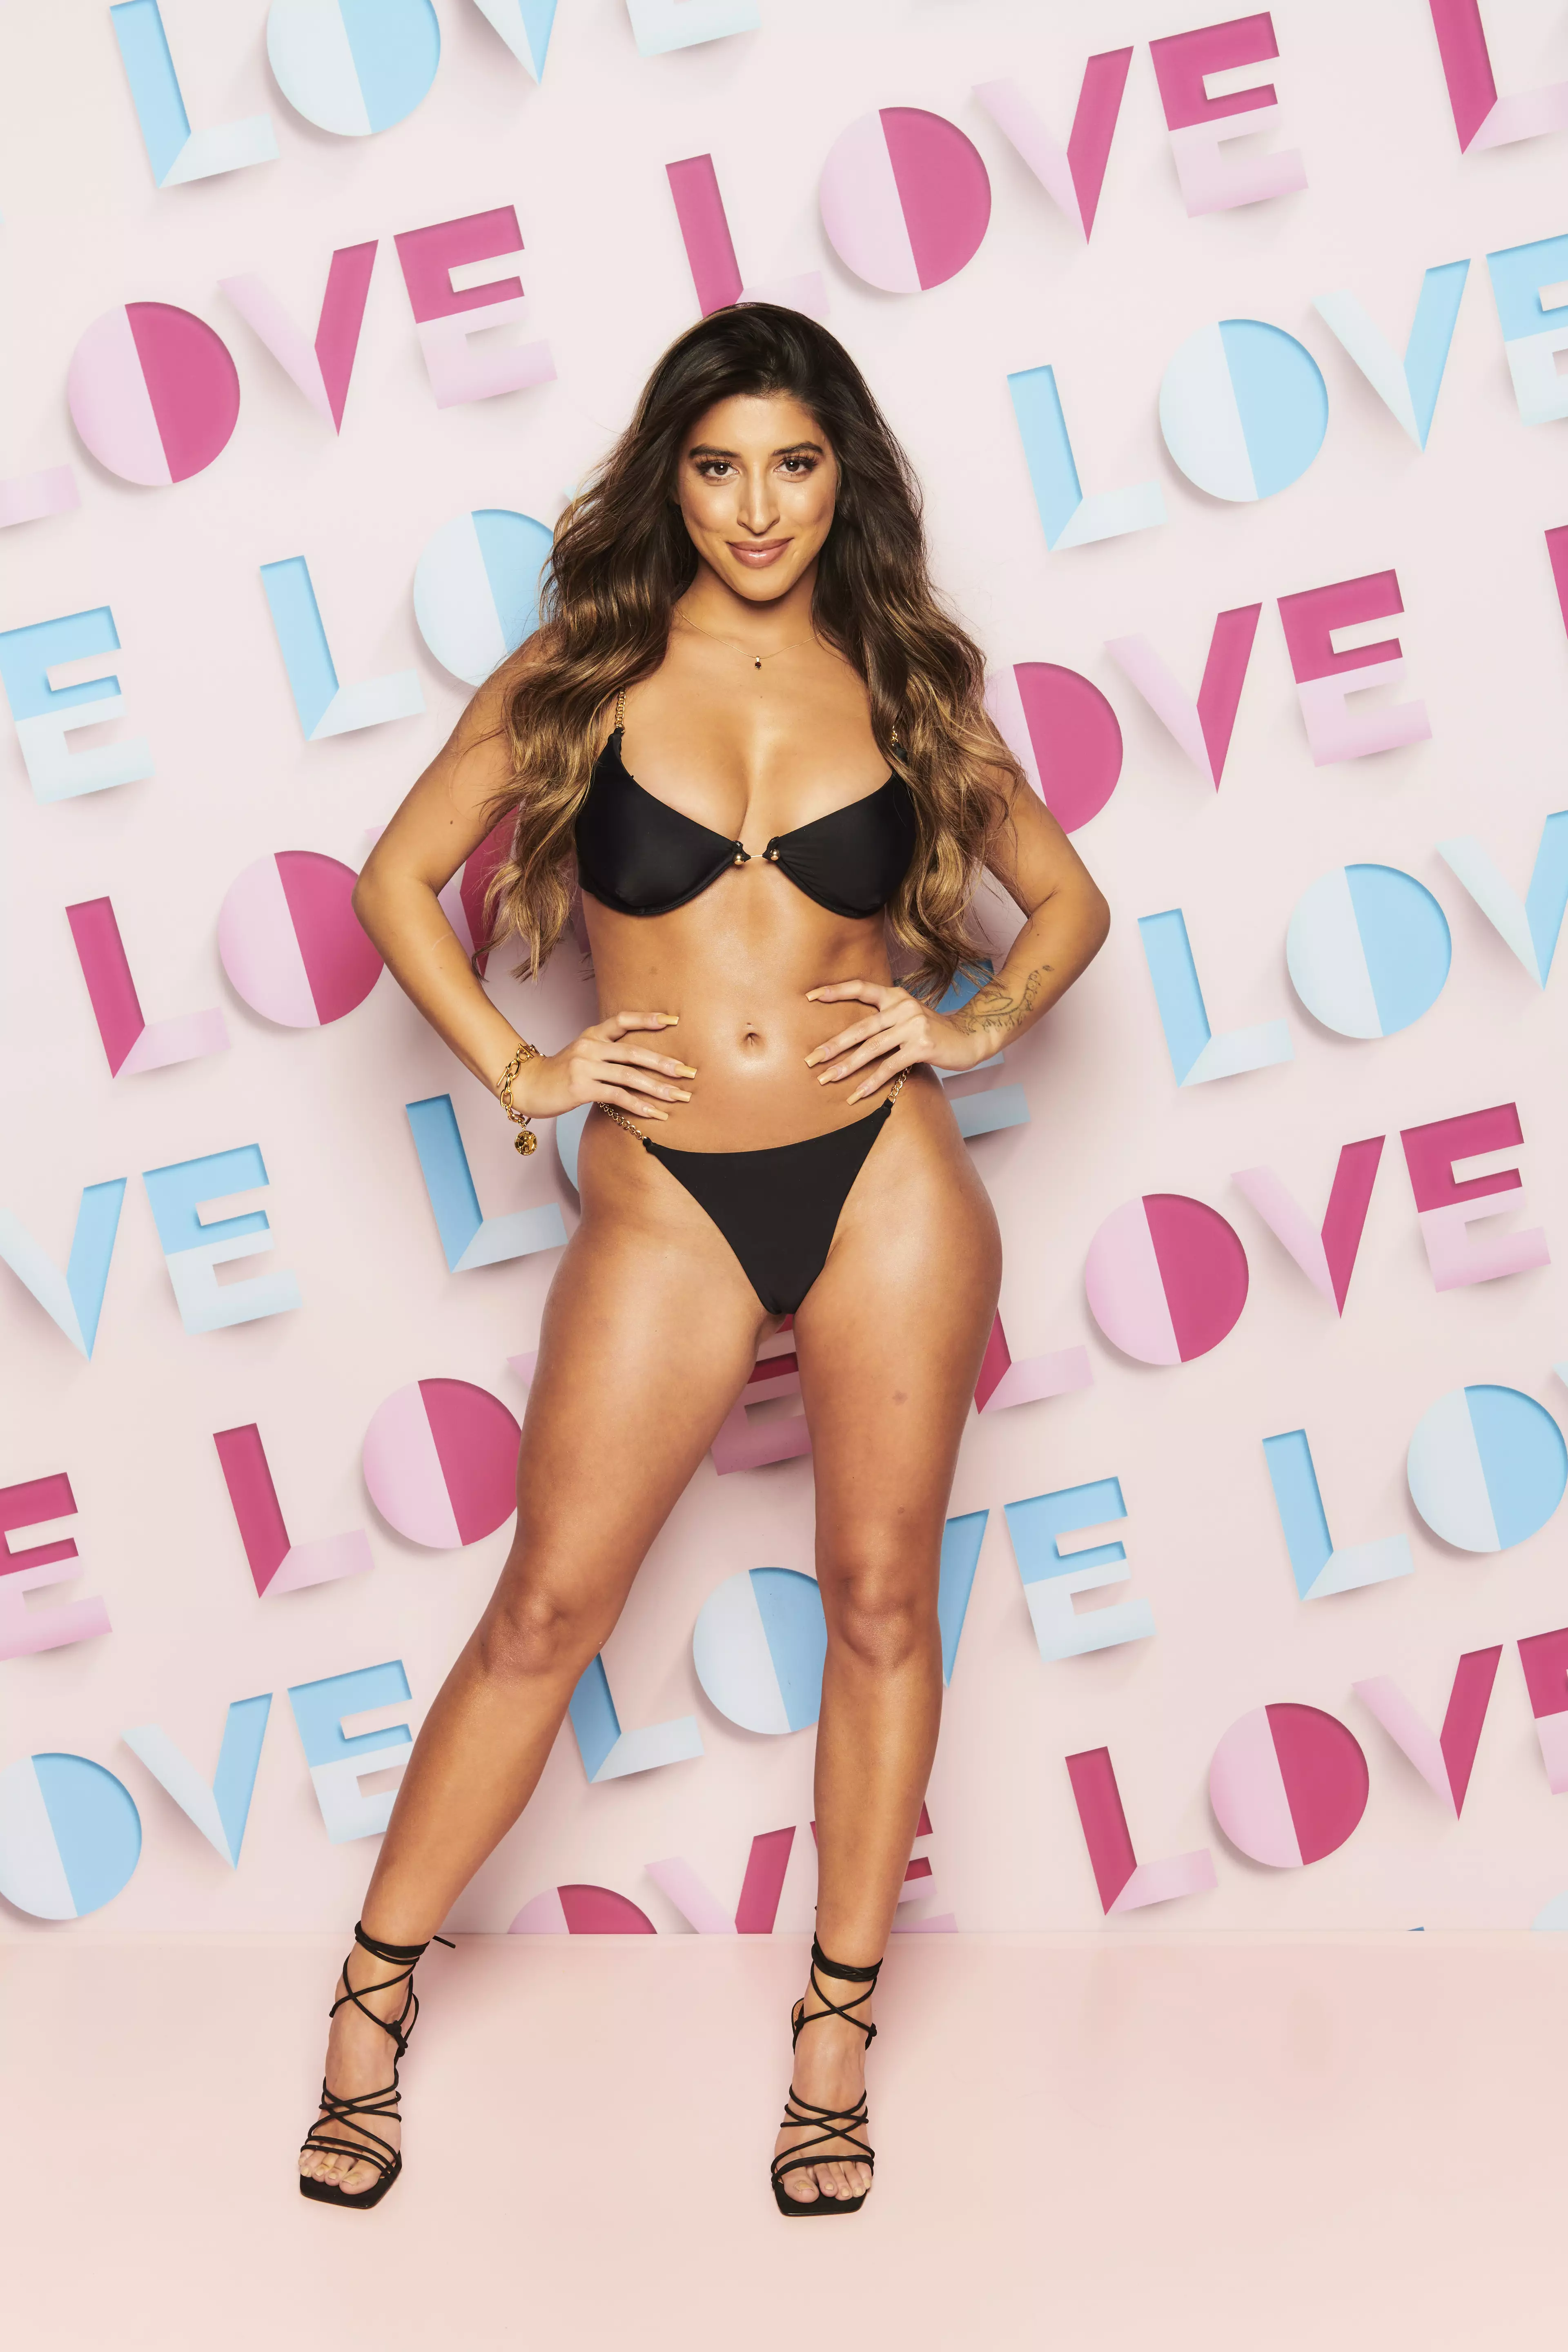 Shannon Singh. Love Island starts at 9pm Monday 28th June on ITV2 and ITV Hub. Episodes are available the following morning on BritBox. (